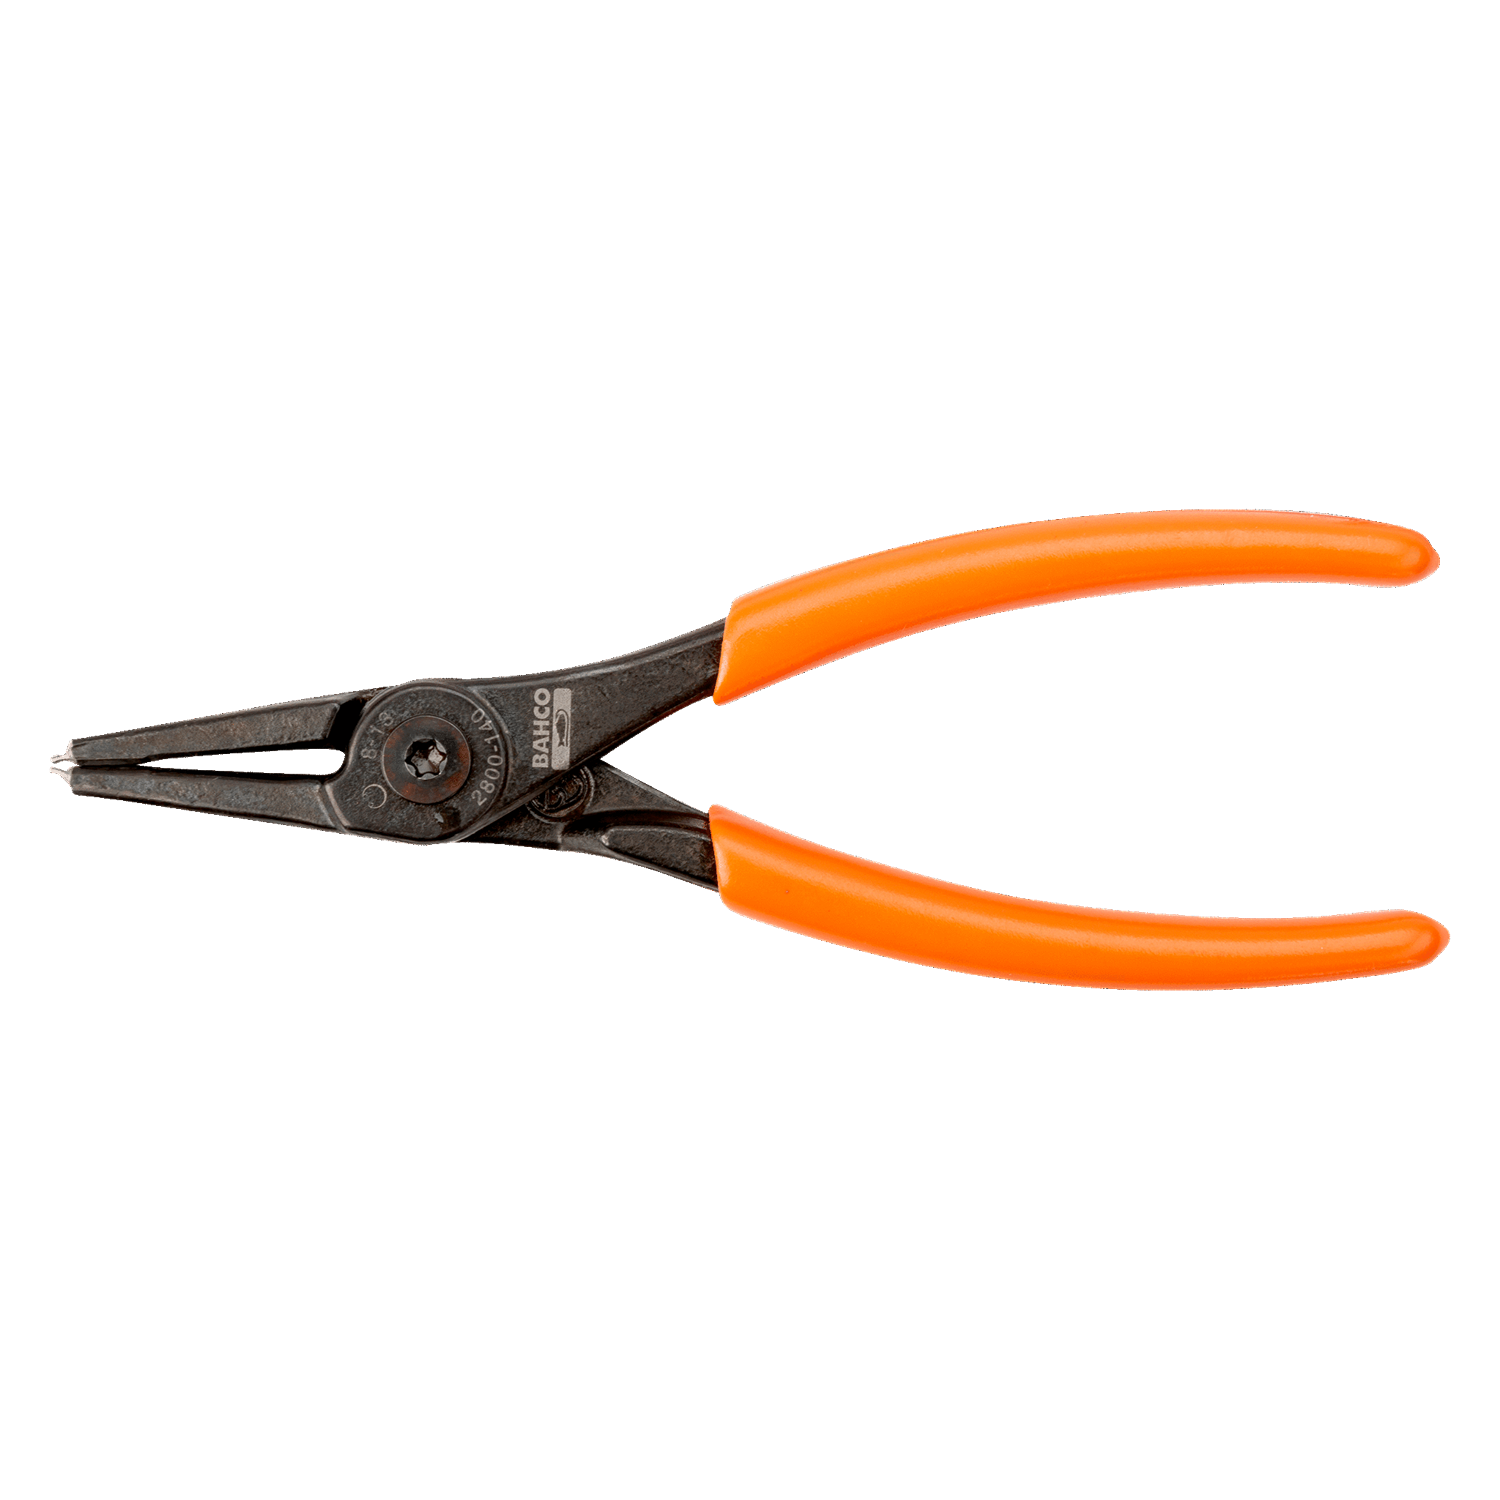 BAHCO 2800 Internal Circlip Plier with Straight Jaws - Premium Circlip Plier from BAHCO - Shop now at Yew Aik.